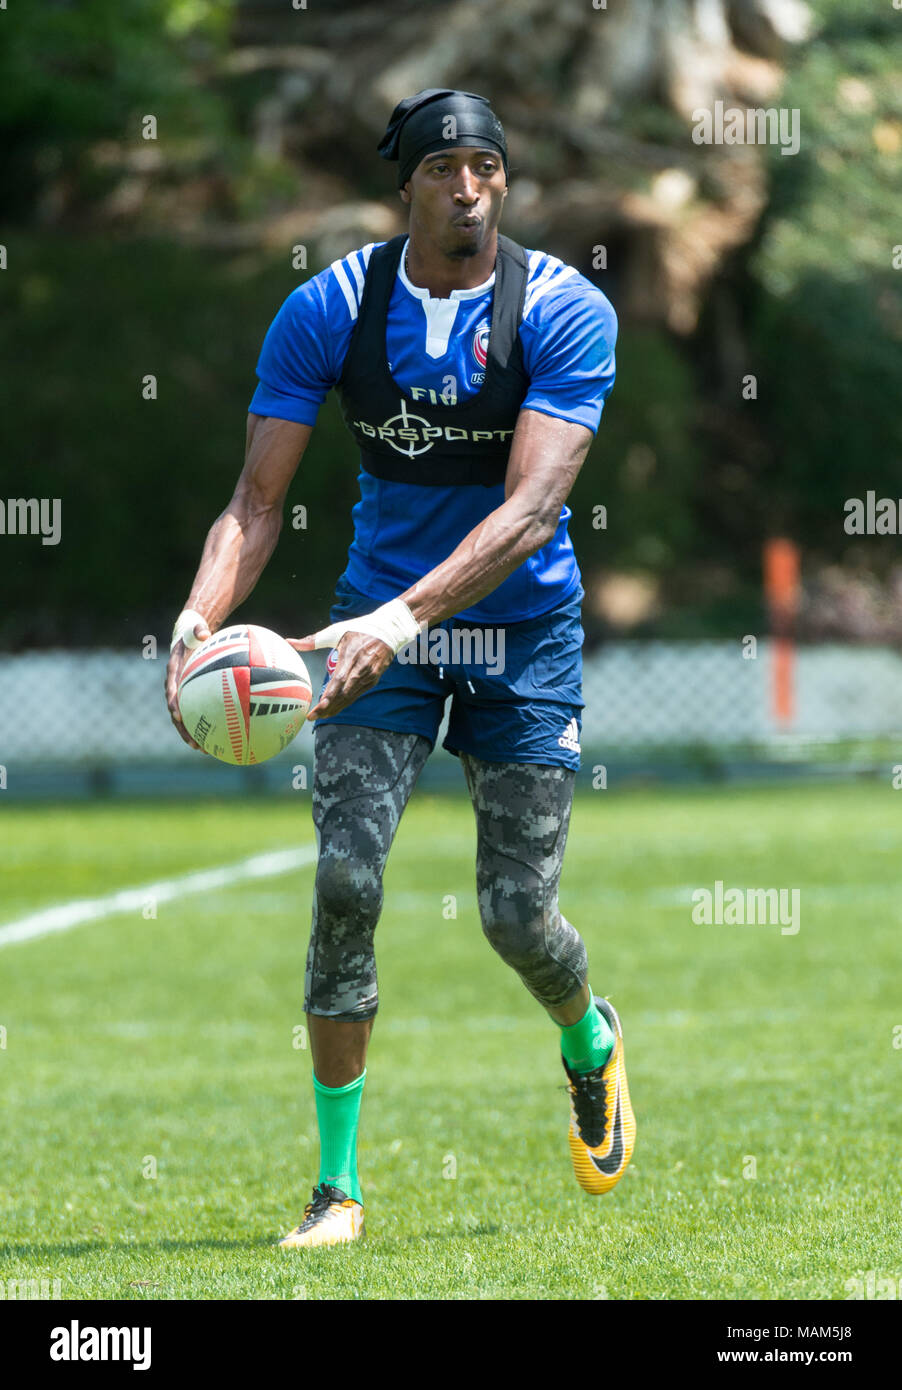 HONG KONG,HONG KONG SAR,CHINA:April 3rd 2018. The USA Rugby team conduct a training session at So Kon Po recreation ground ahead of their Hong Kong Rugby 7's matches.Winger Perry Baker passes the ball during passing drills.Alamy Live News Stock Photo